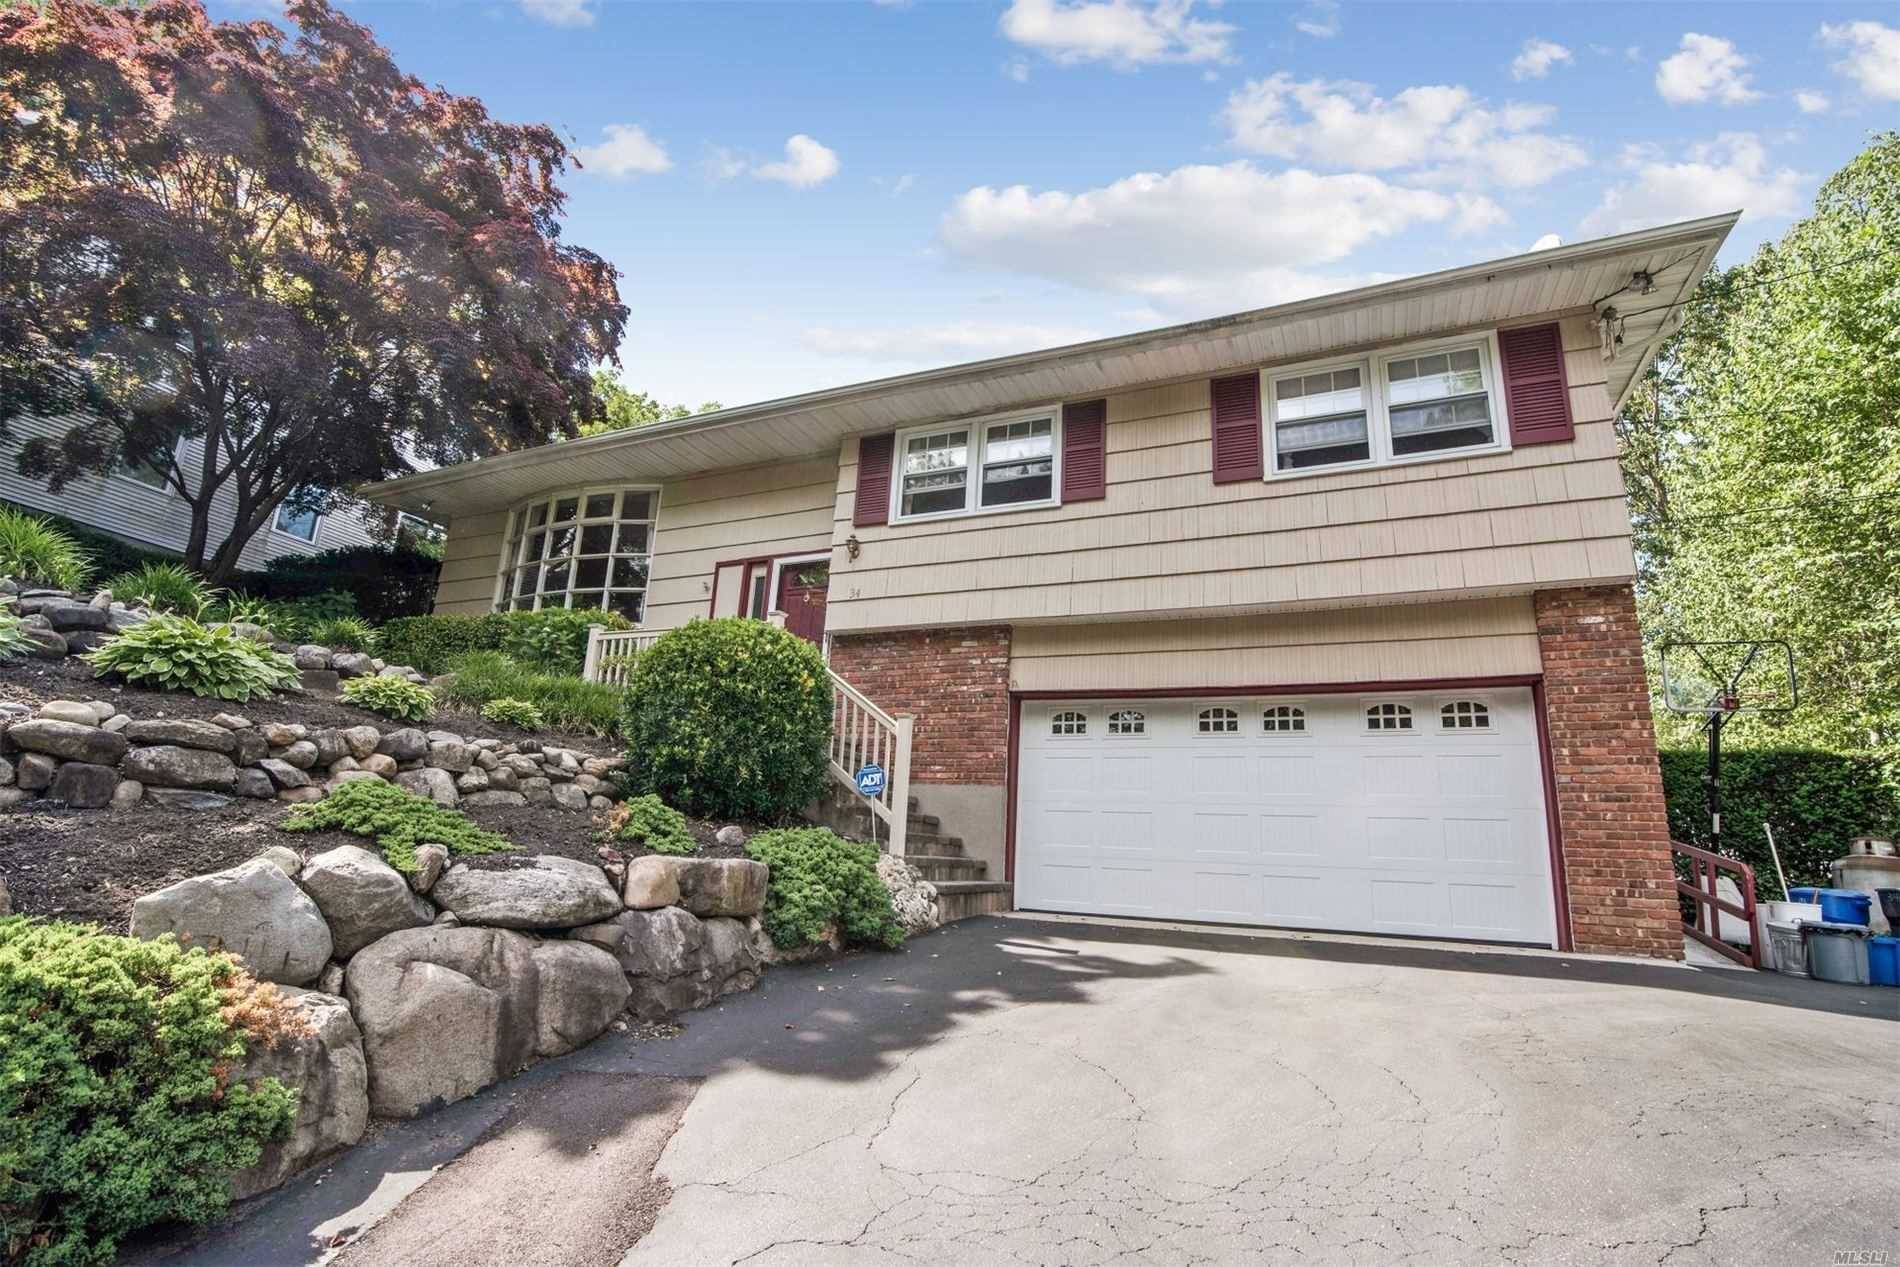 Beautifully landscaped, nestled on the hillside of this quiet tree lined street.